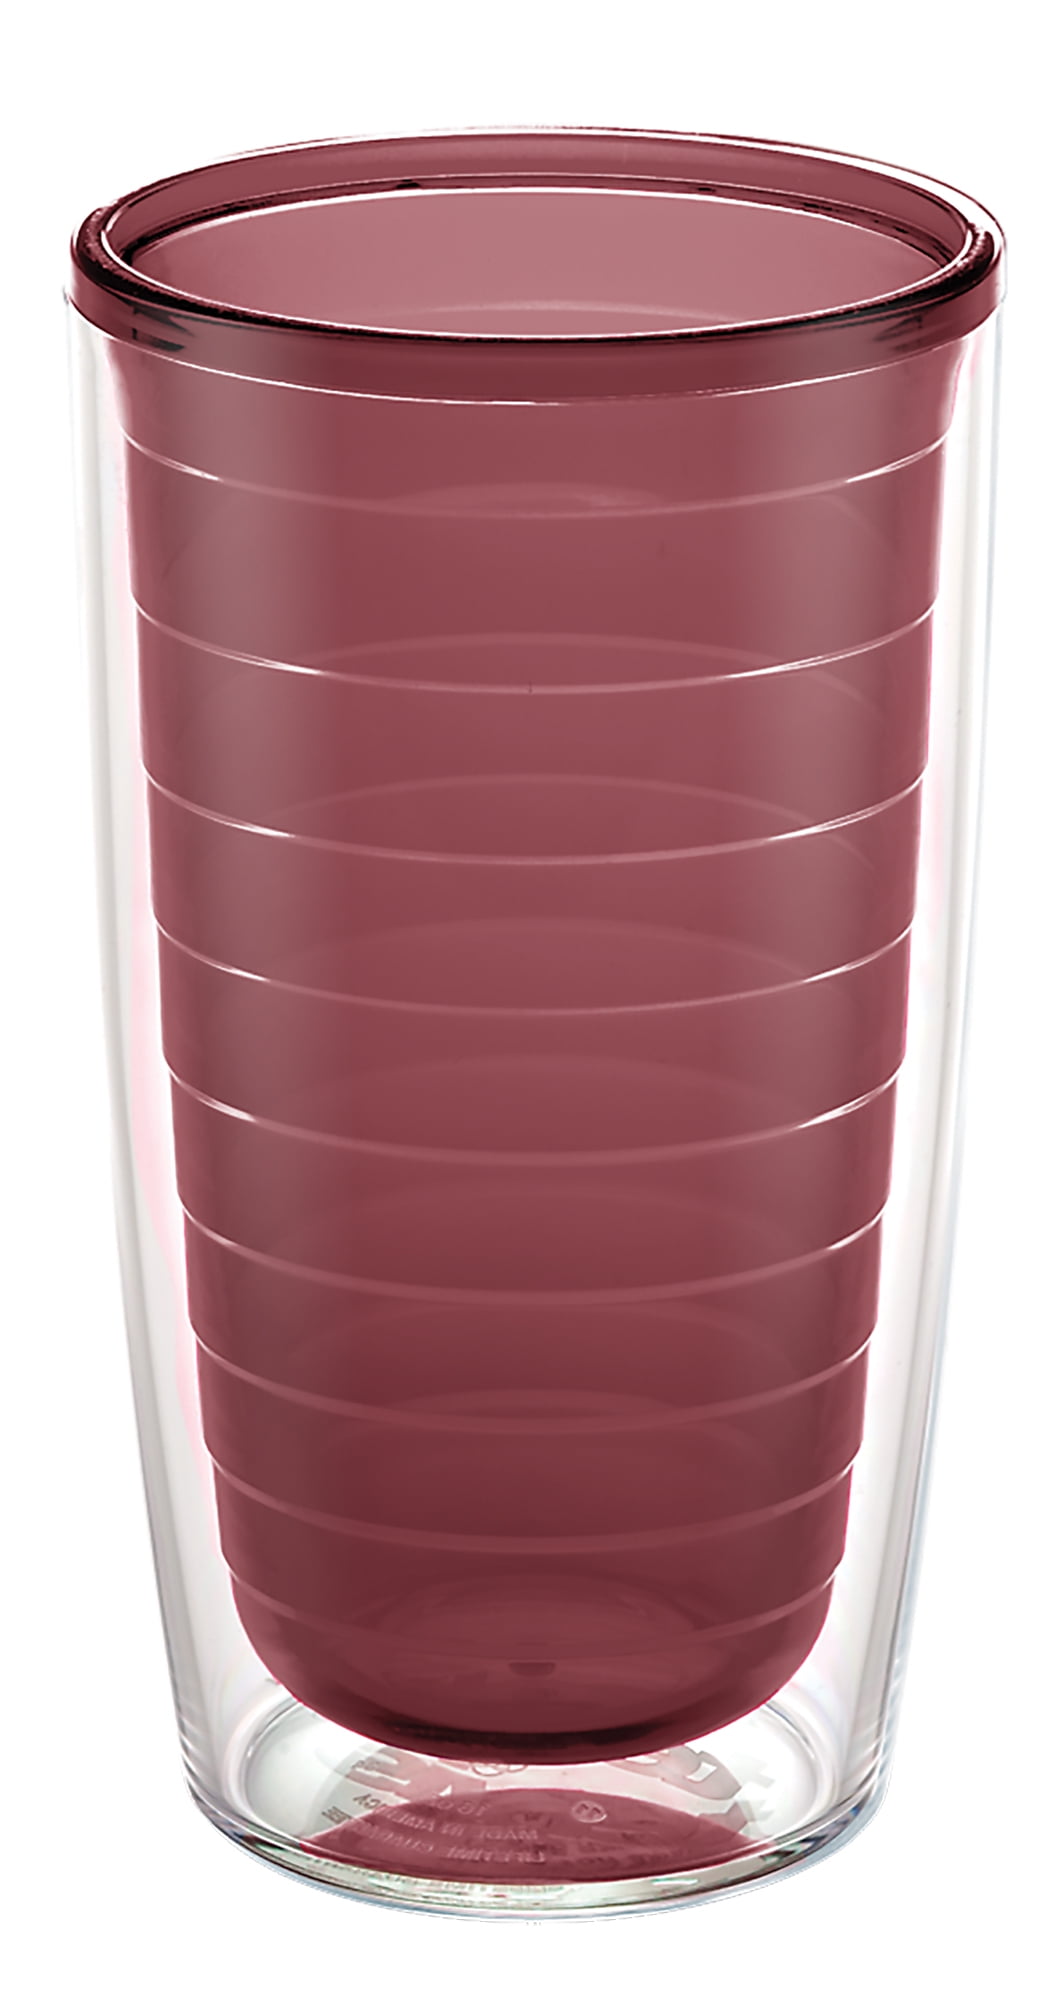 Tervis Clear 24 oz. 2-Pack Plastic Double Walled Insulated Tumbler No Lid  1001833 - The Home Depot